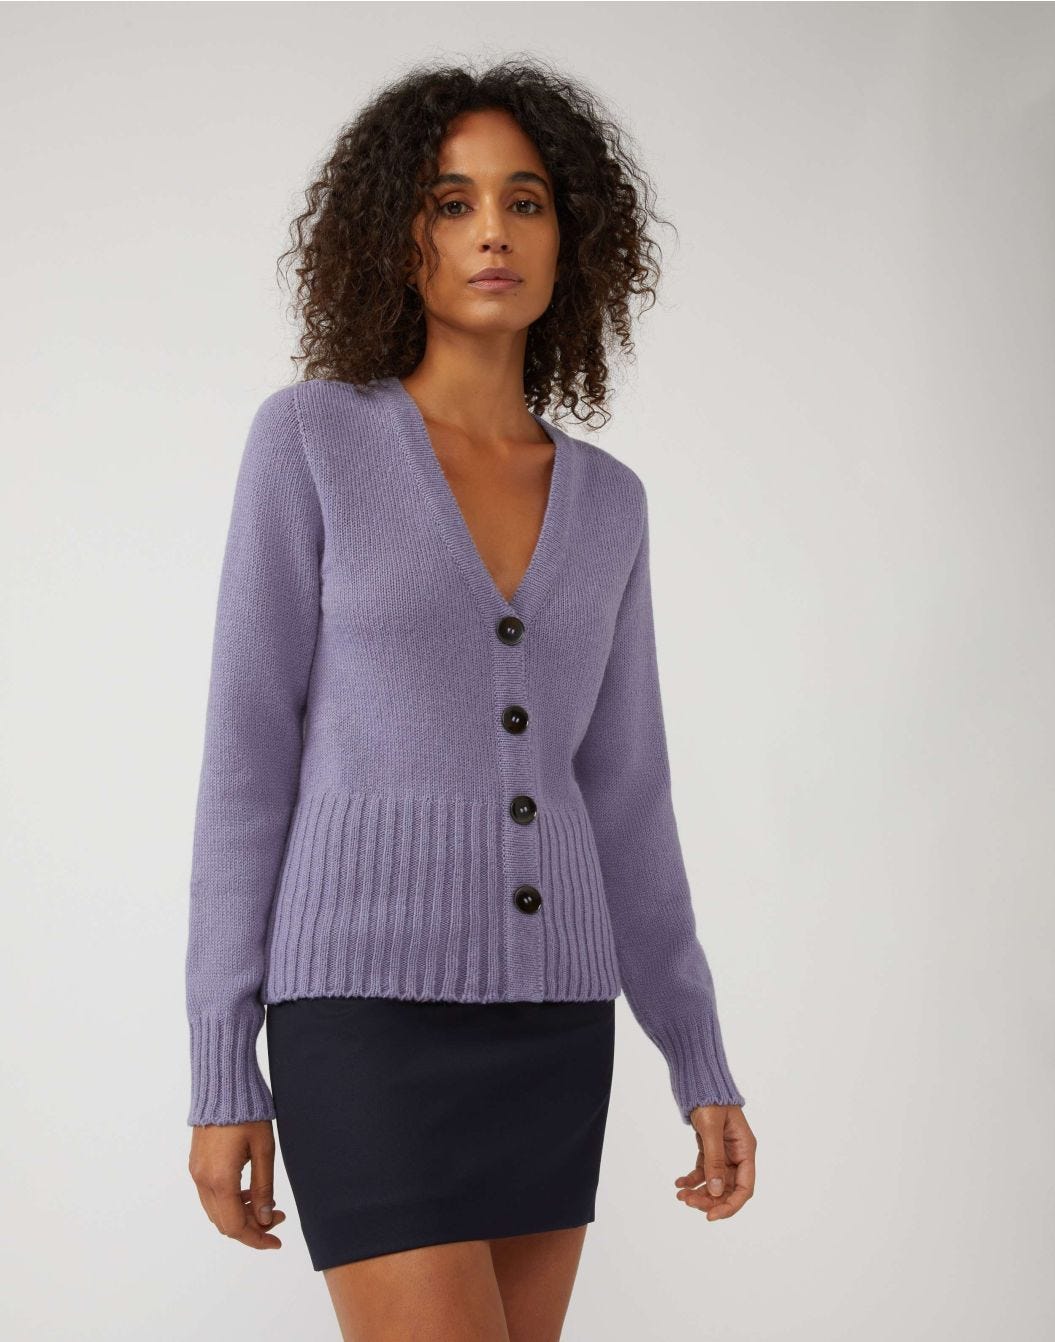 Cropped cardigan in lilac baby alpaca